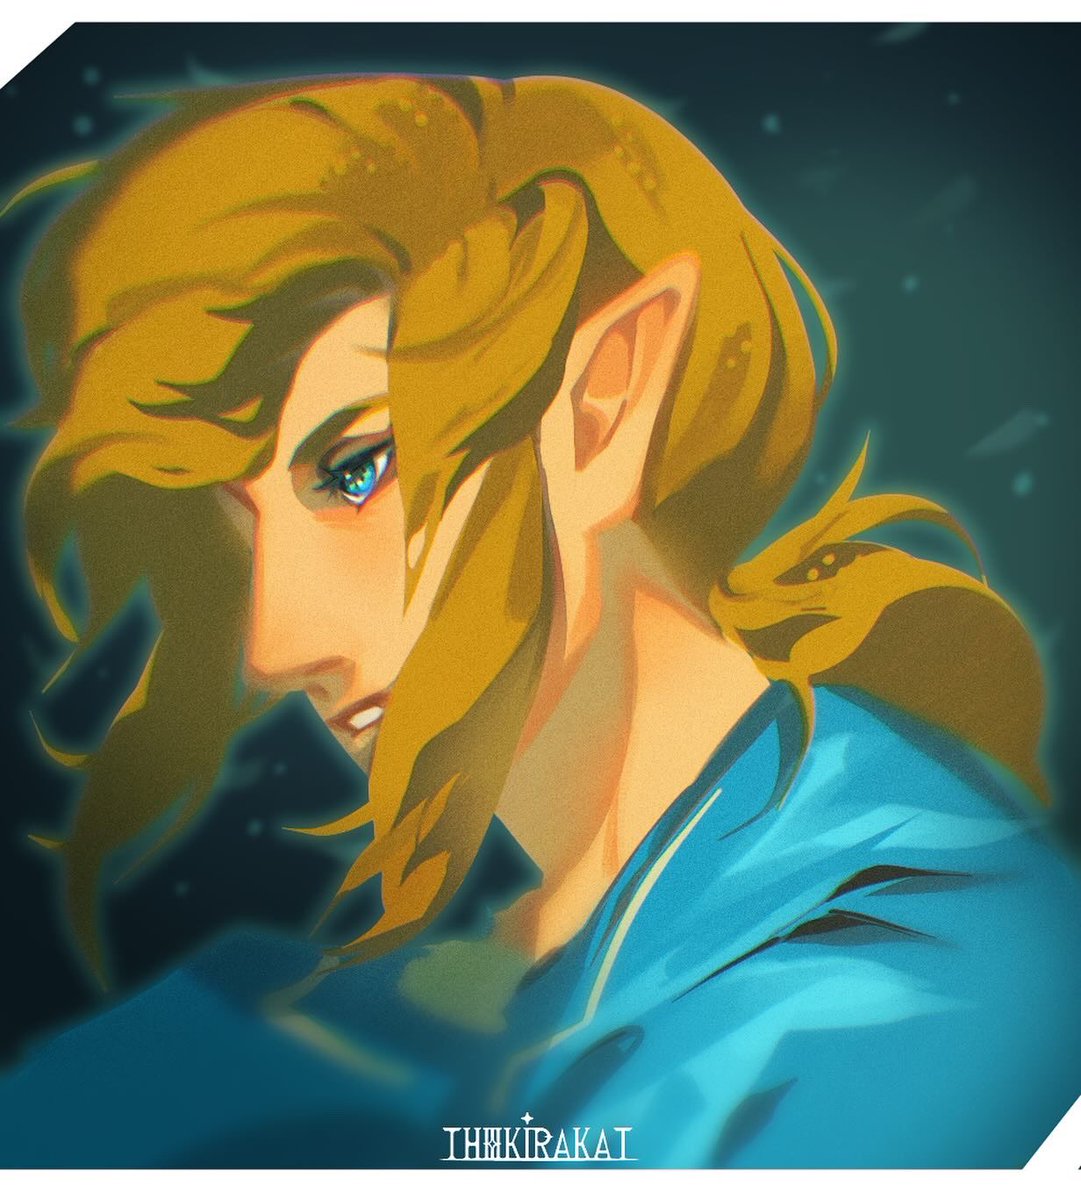 My Fanart of Link from Breath of the wild❤️